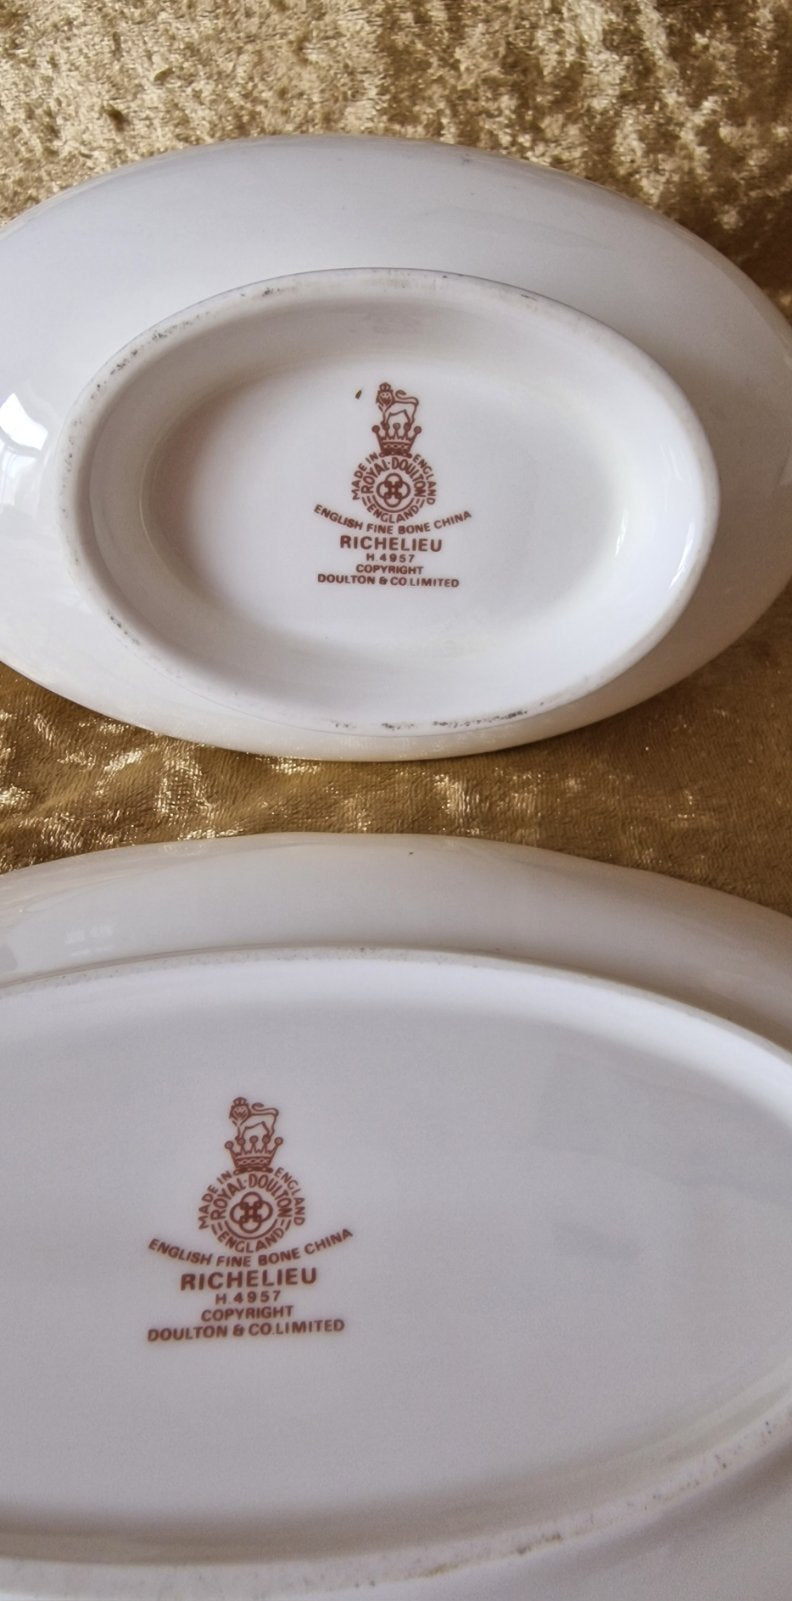 Royal Doulton "Richelieu" Sauce Boat and Stand